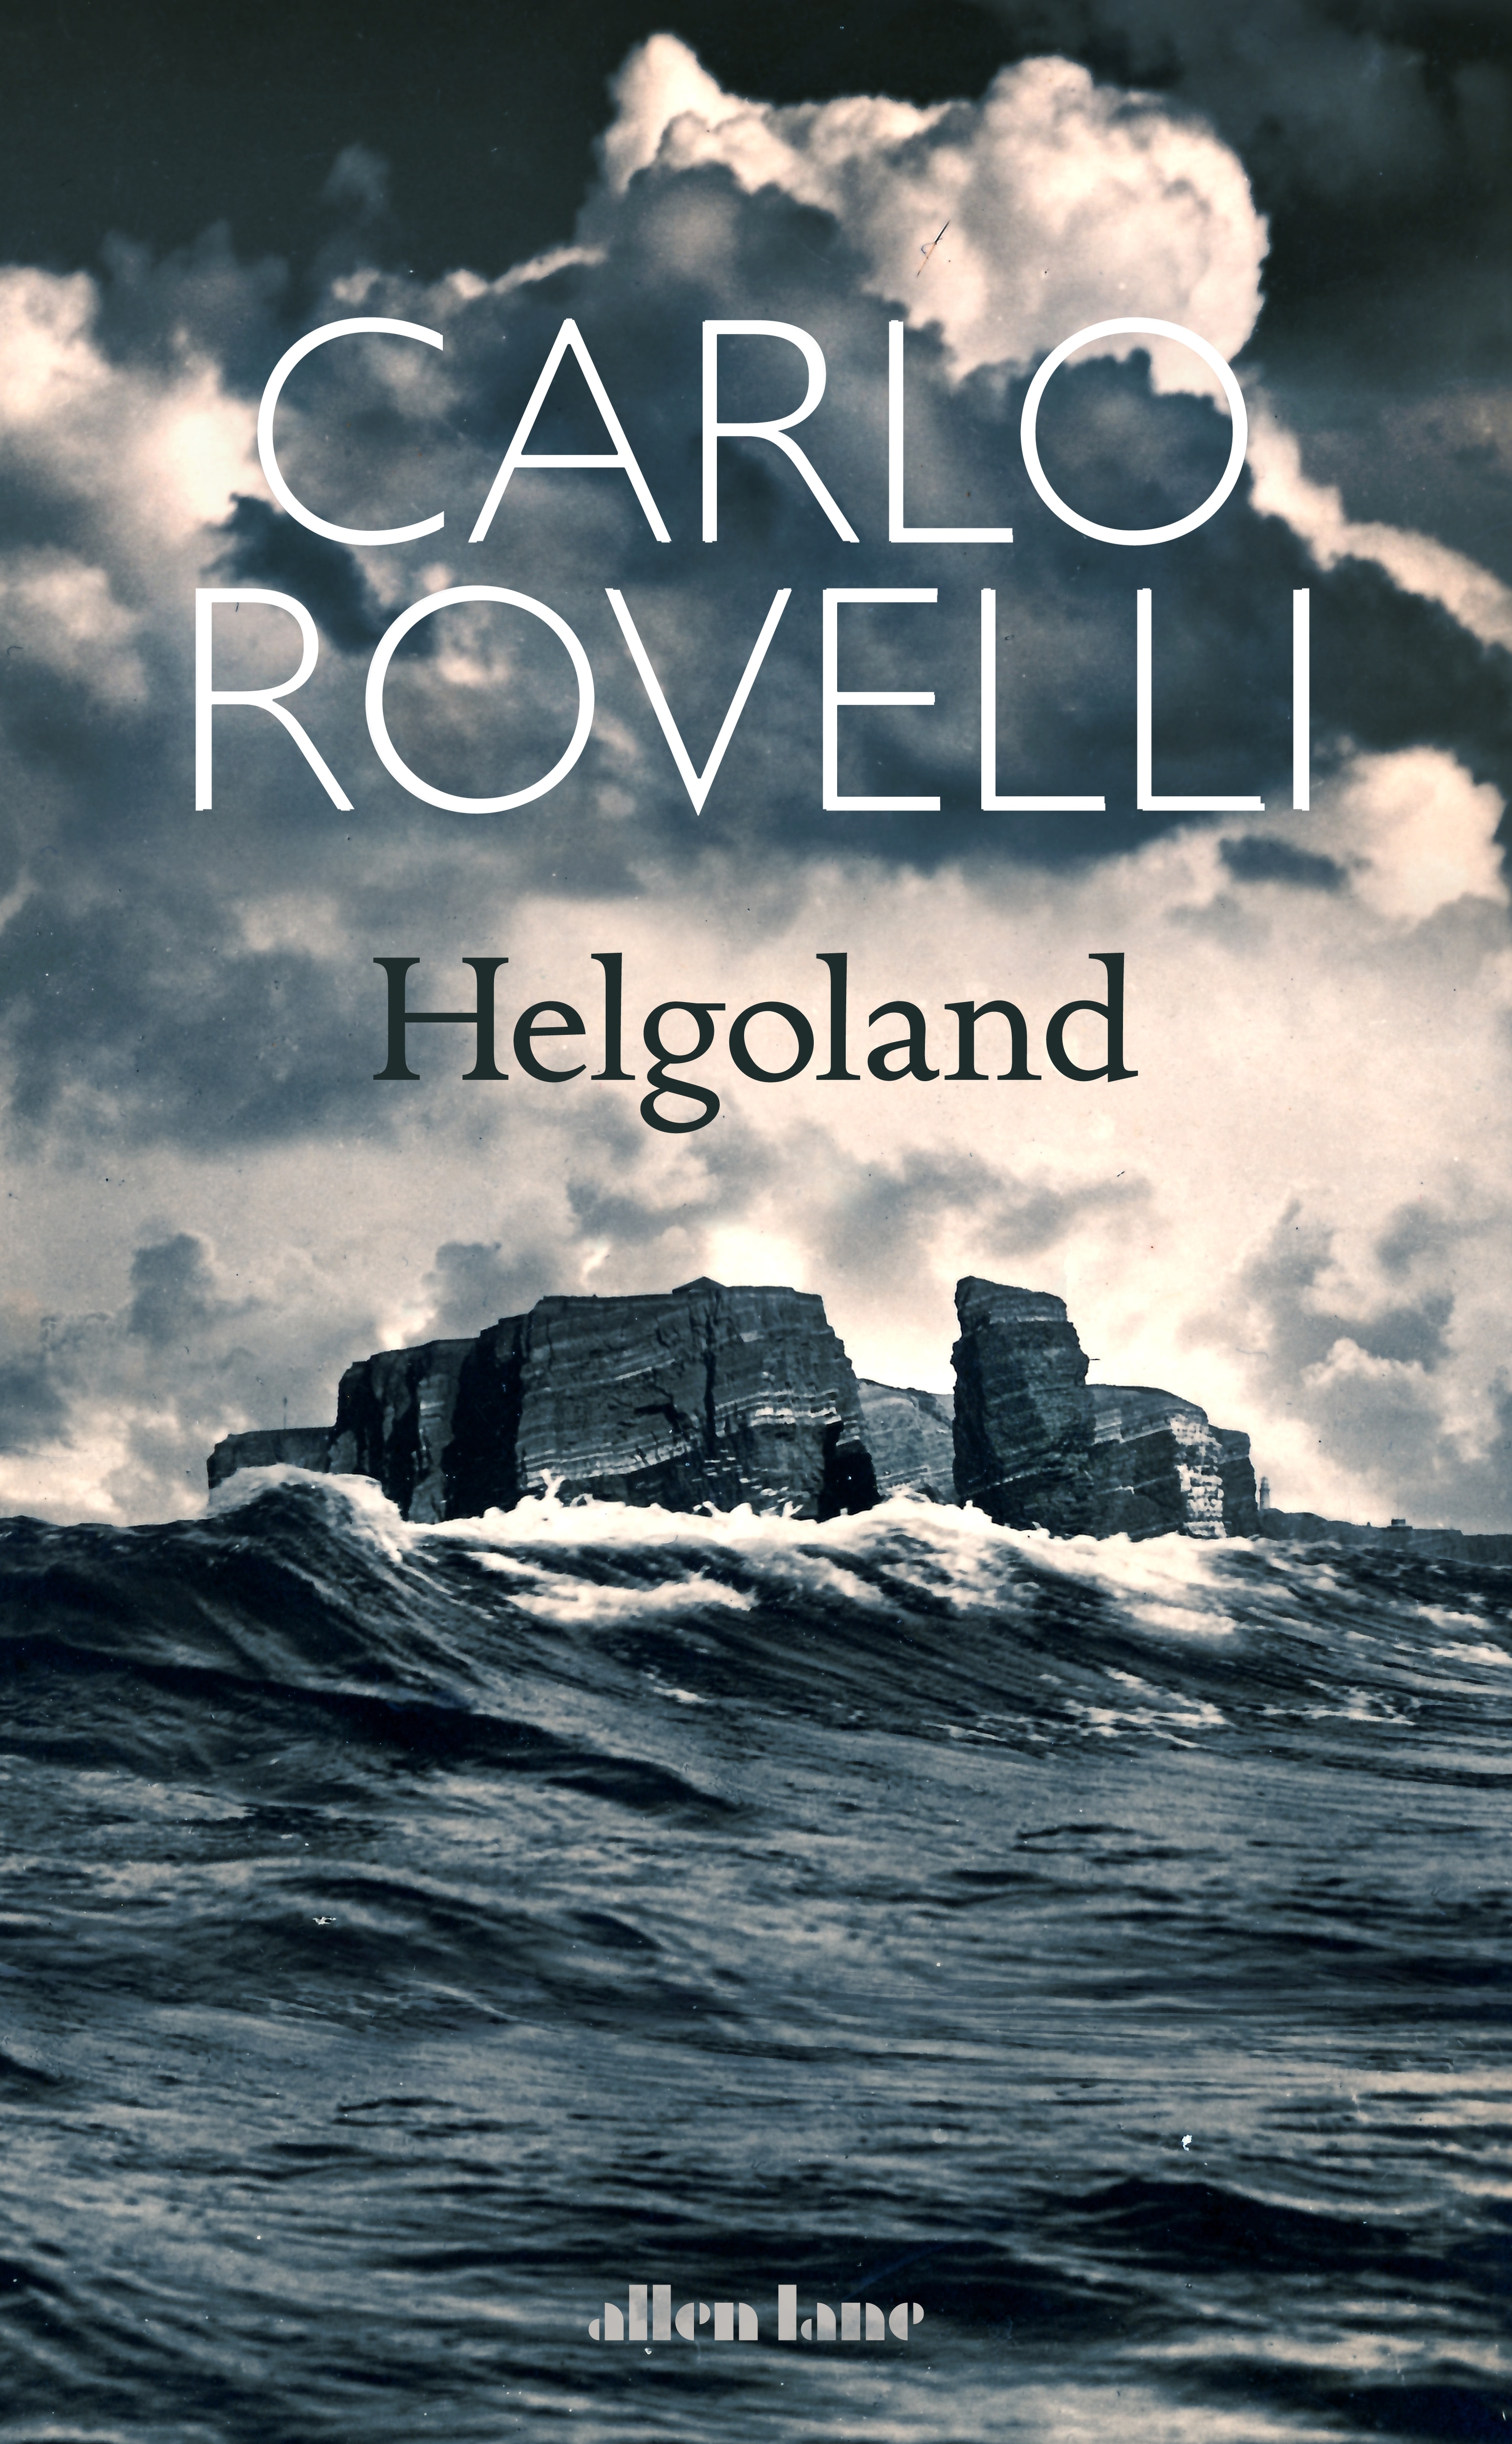 Book “Helgoland” by Carlo Rovelli — March 25, 2021